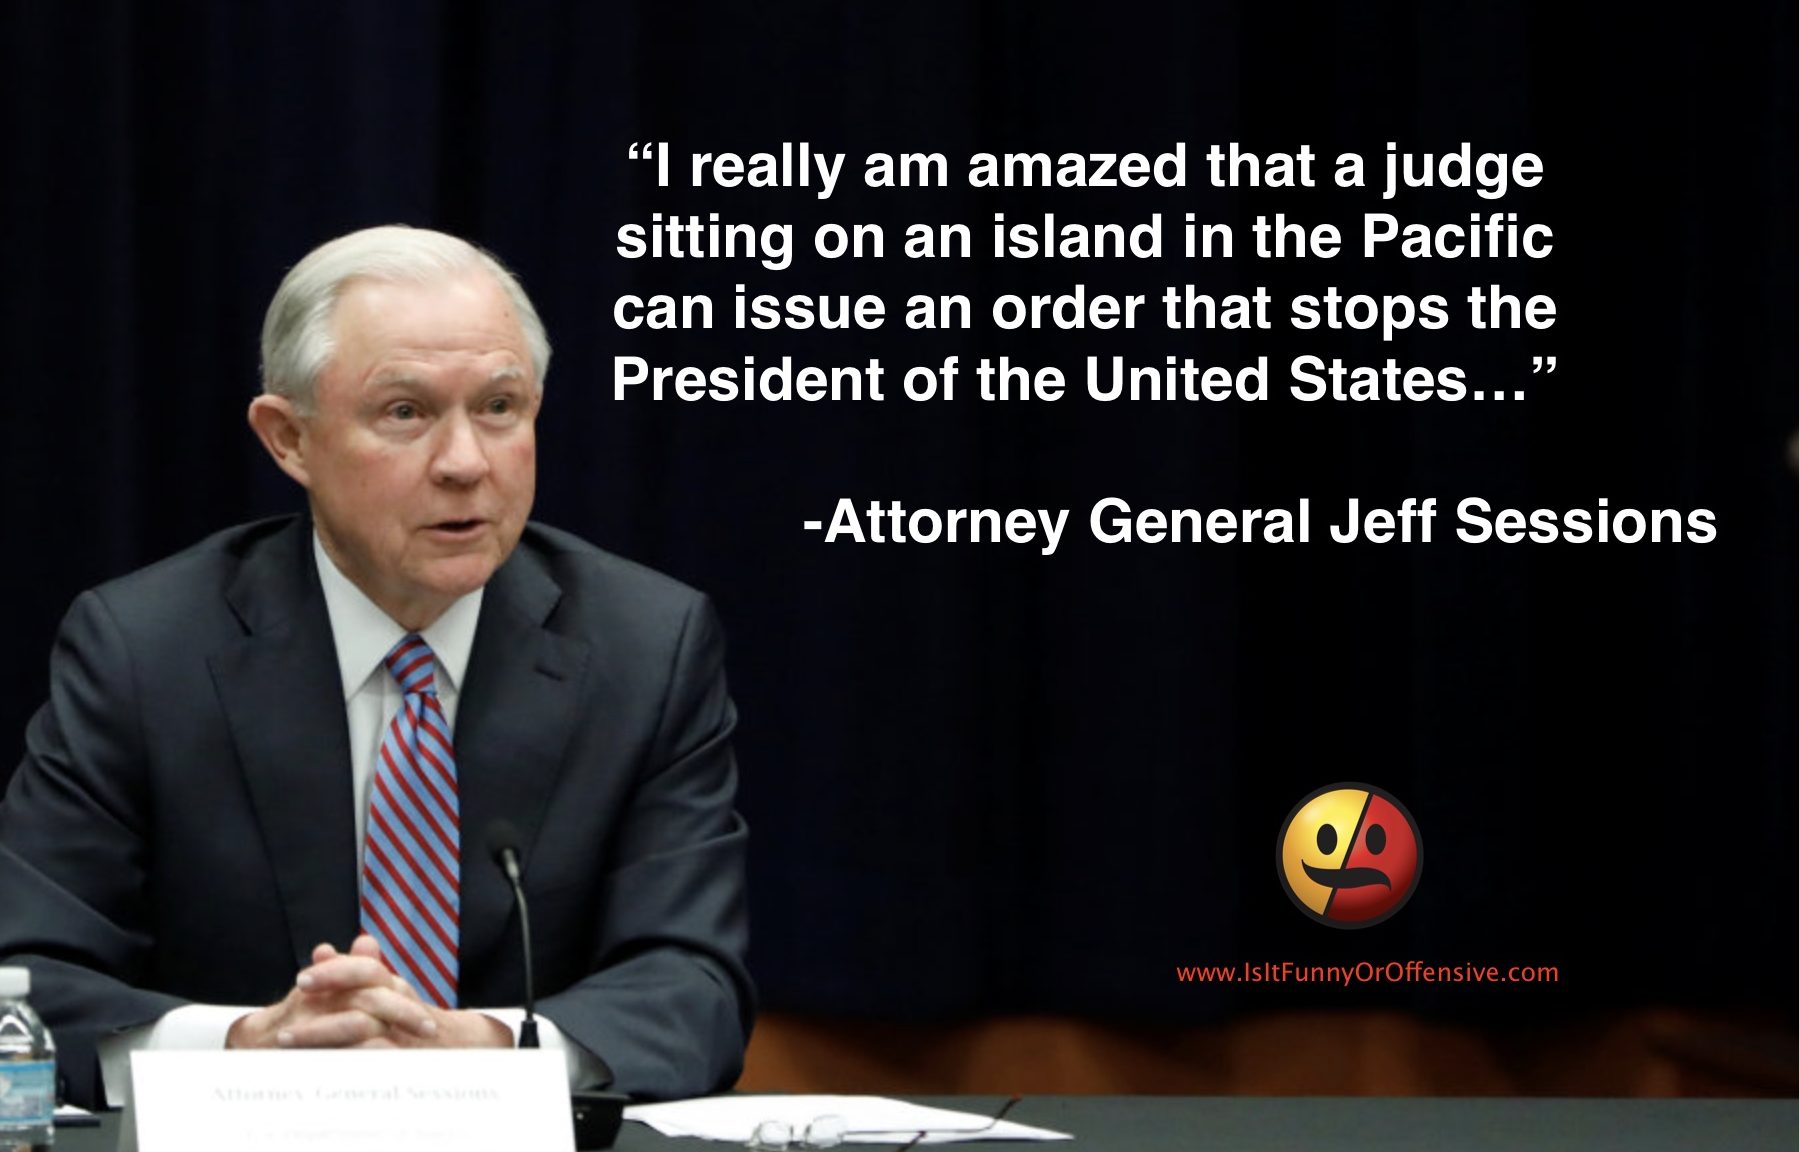 Jeff Sessions Dismisses Hawaii as "An Island in the Pacific"